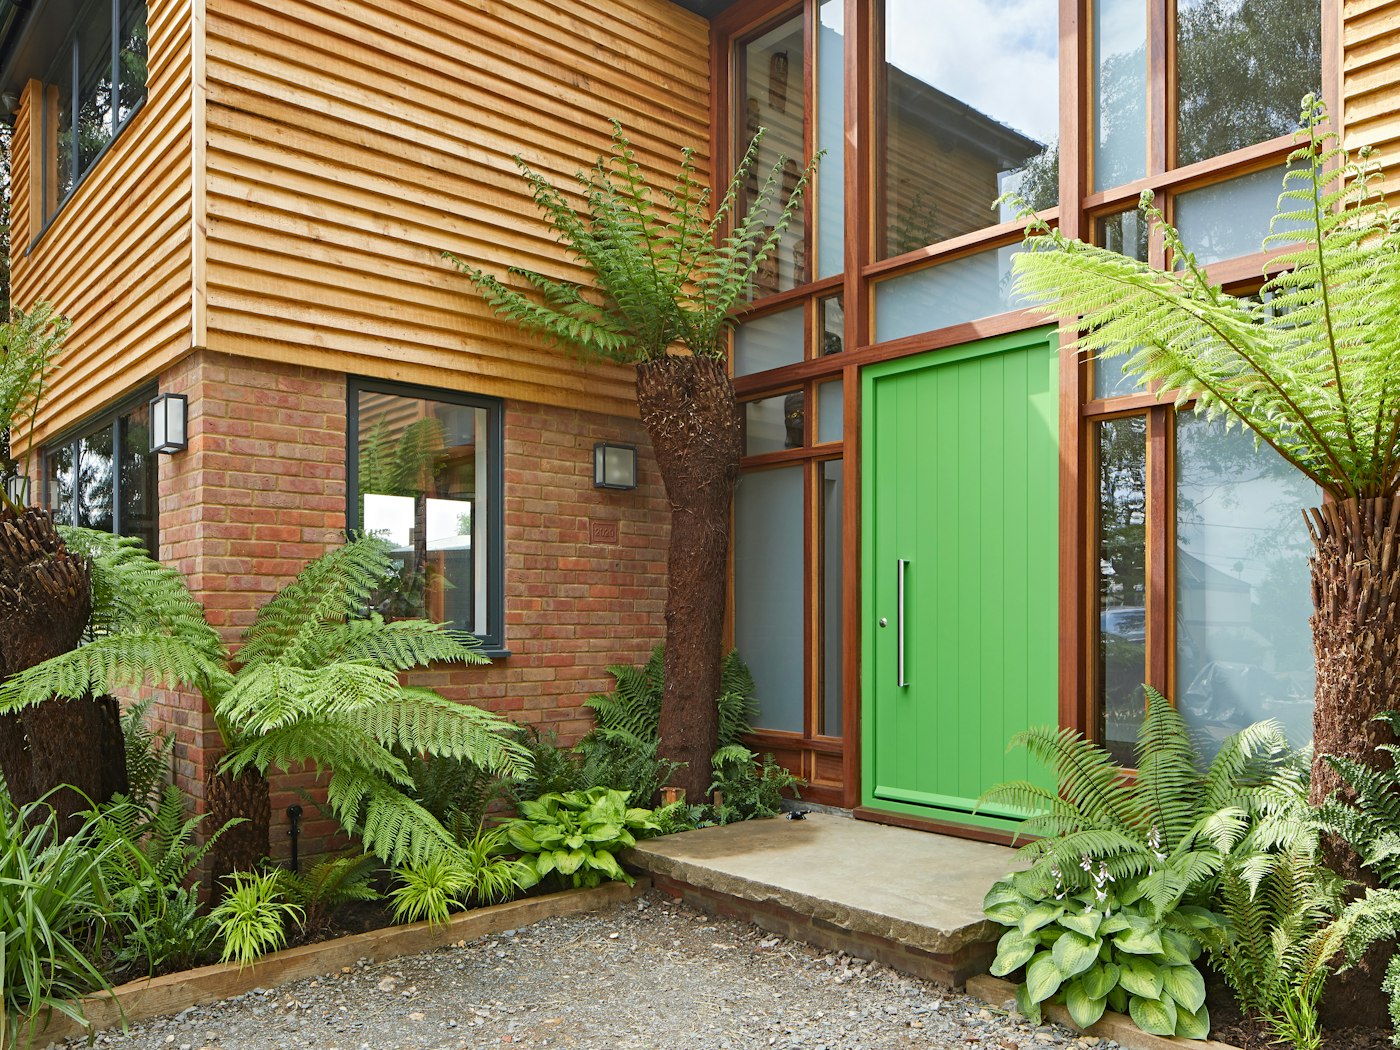 This vibrant green Porto door (painted RAL 6018) strikes a glorious note of the tropical against timber cladding and red brick 